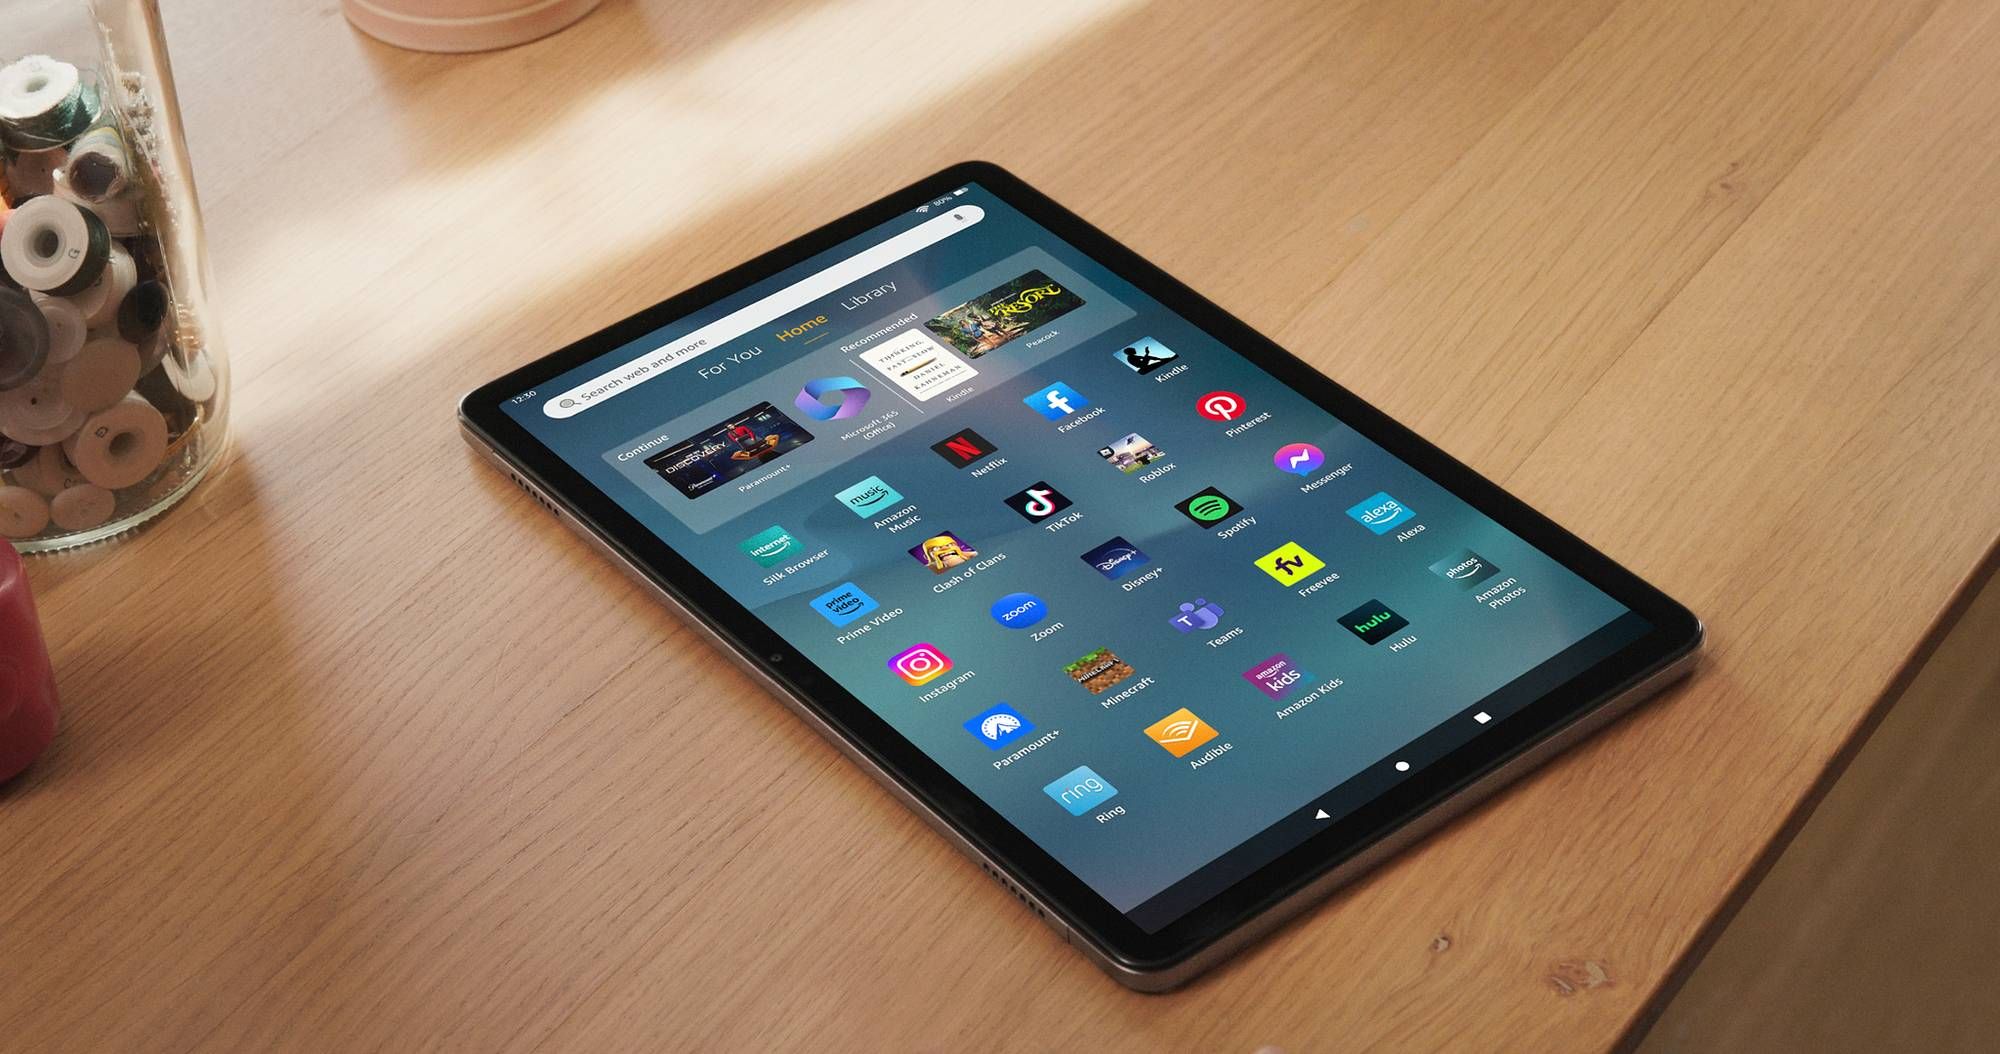 Amazon's Fire Max 11 wants to dominate the midrange Android tablet